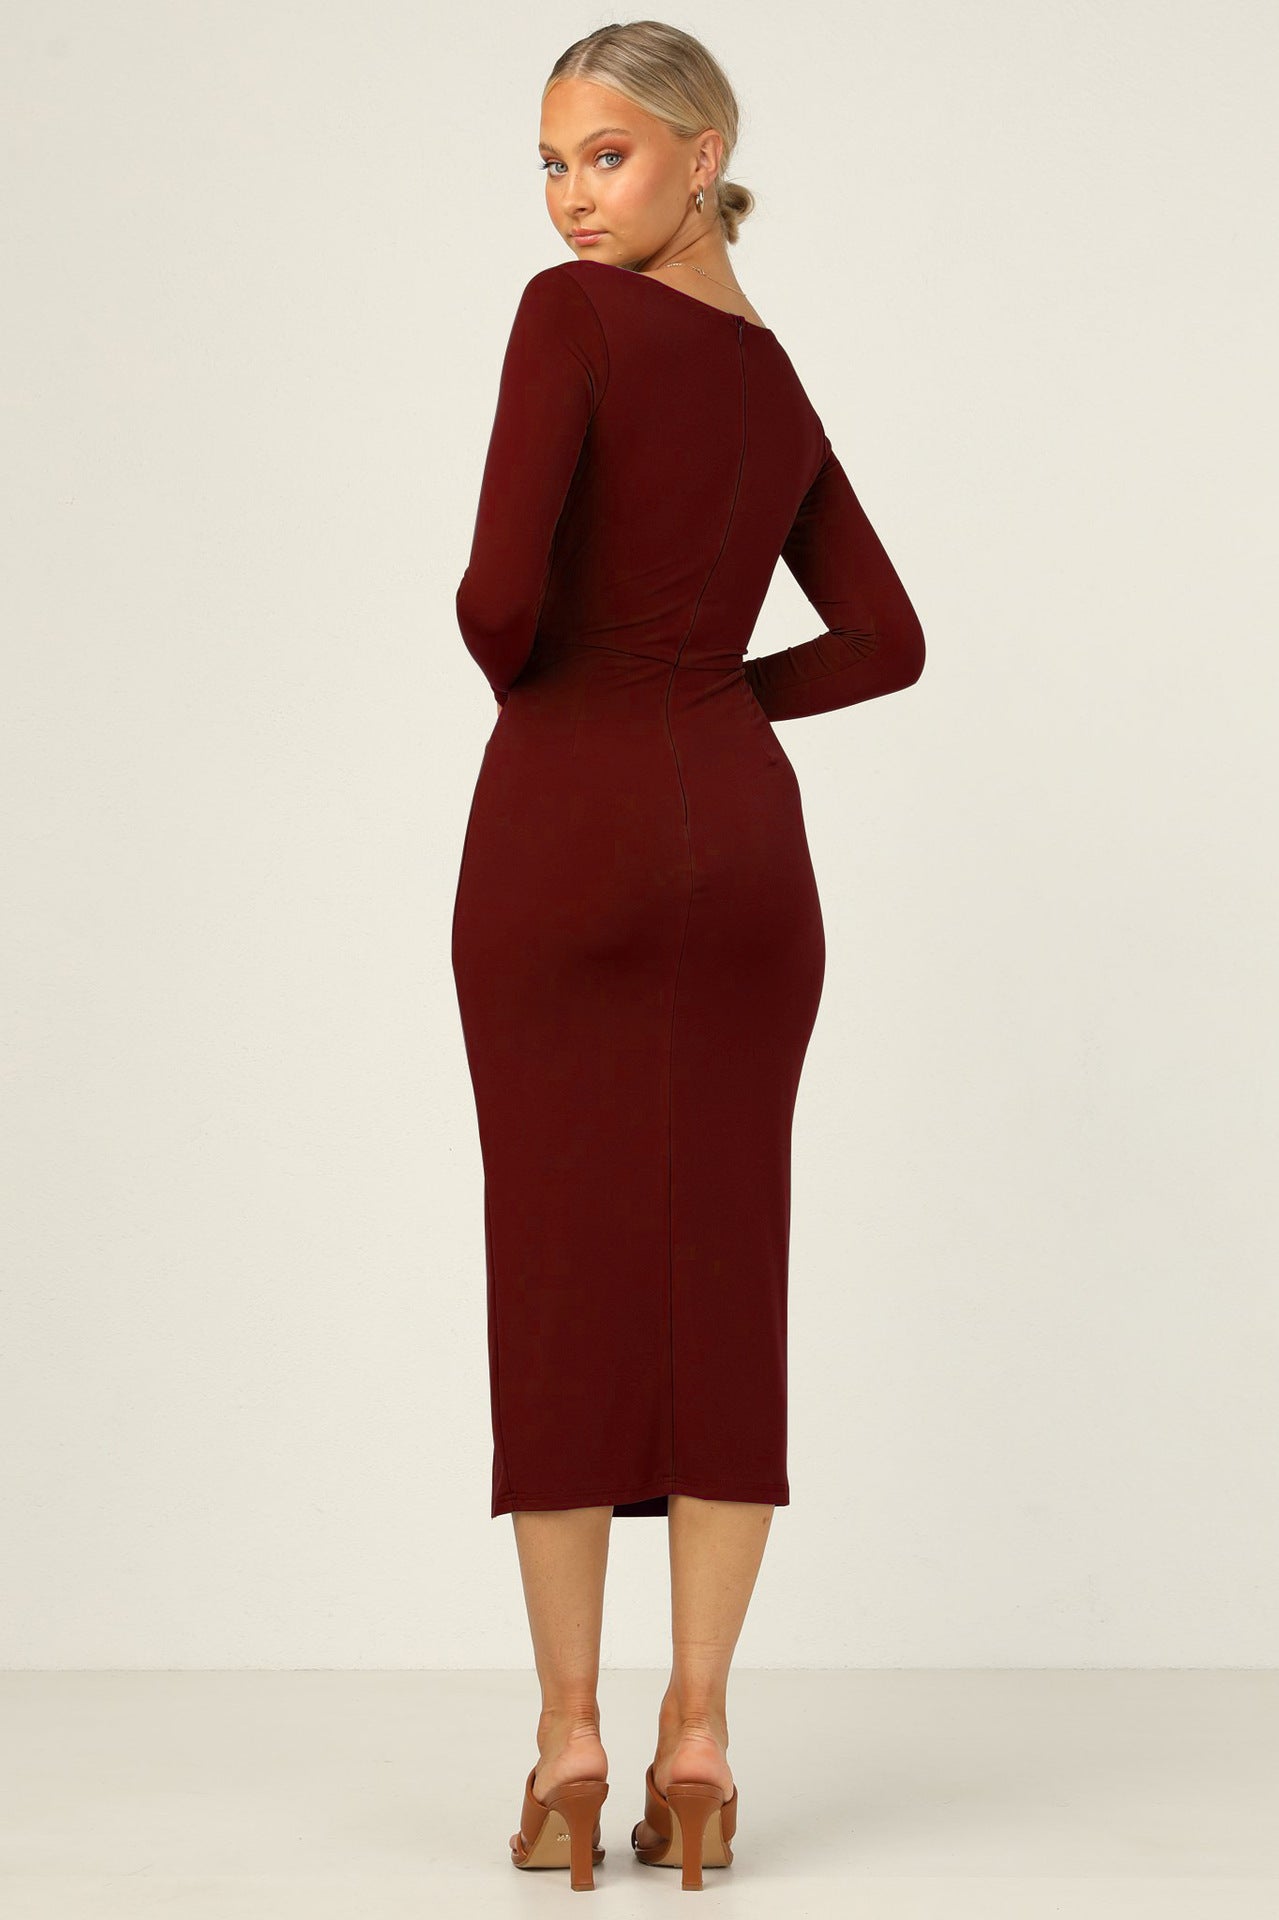 Hollow Out Cutout Out Twisted Sexy Long Sleeve Slit Sheath Dress